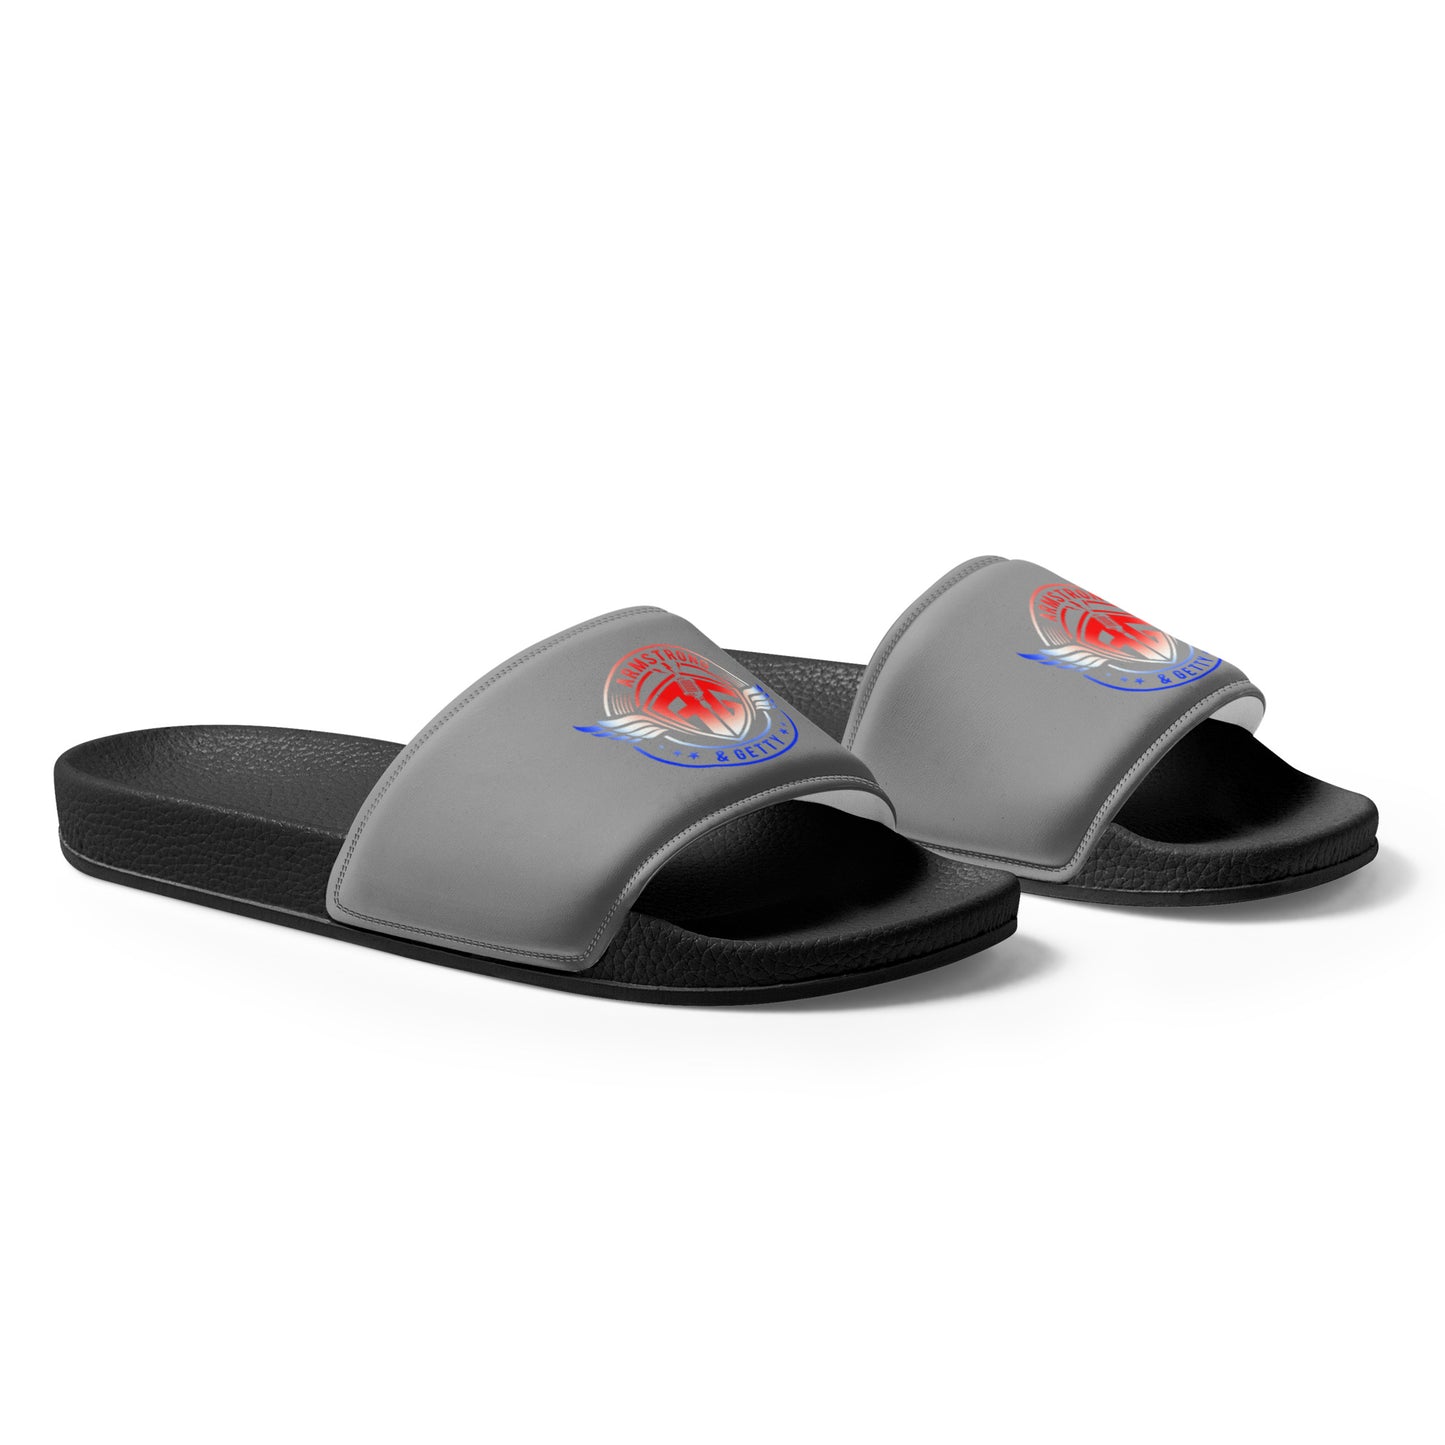 The A&G Air Force Patriot Slides